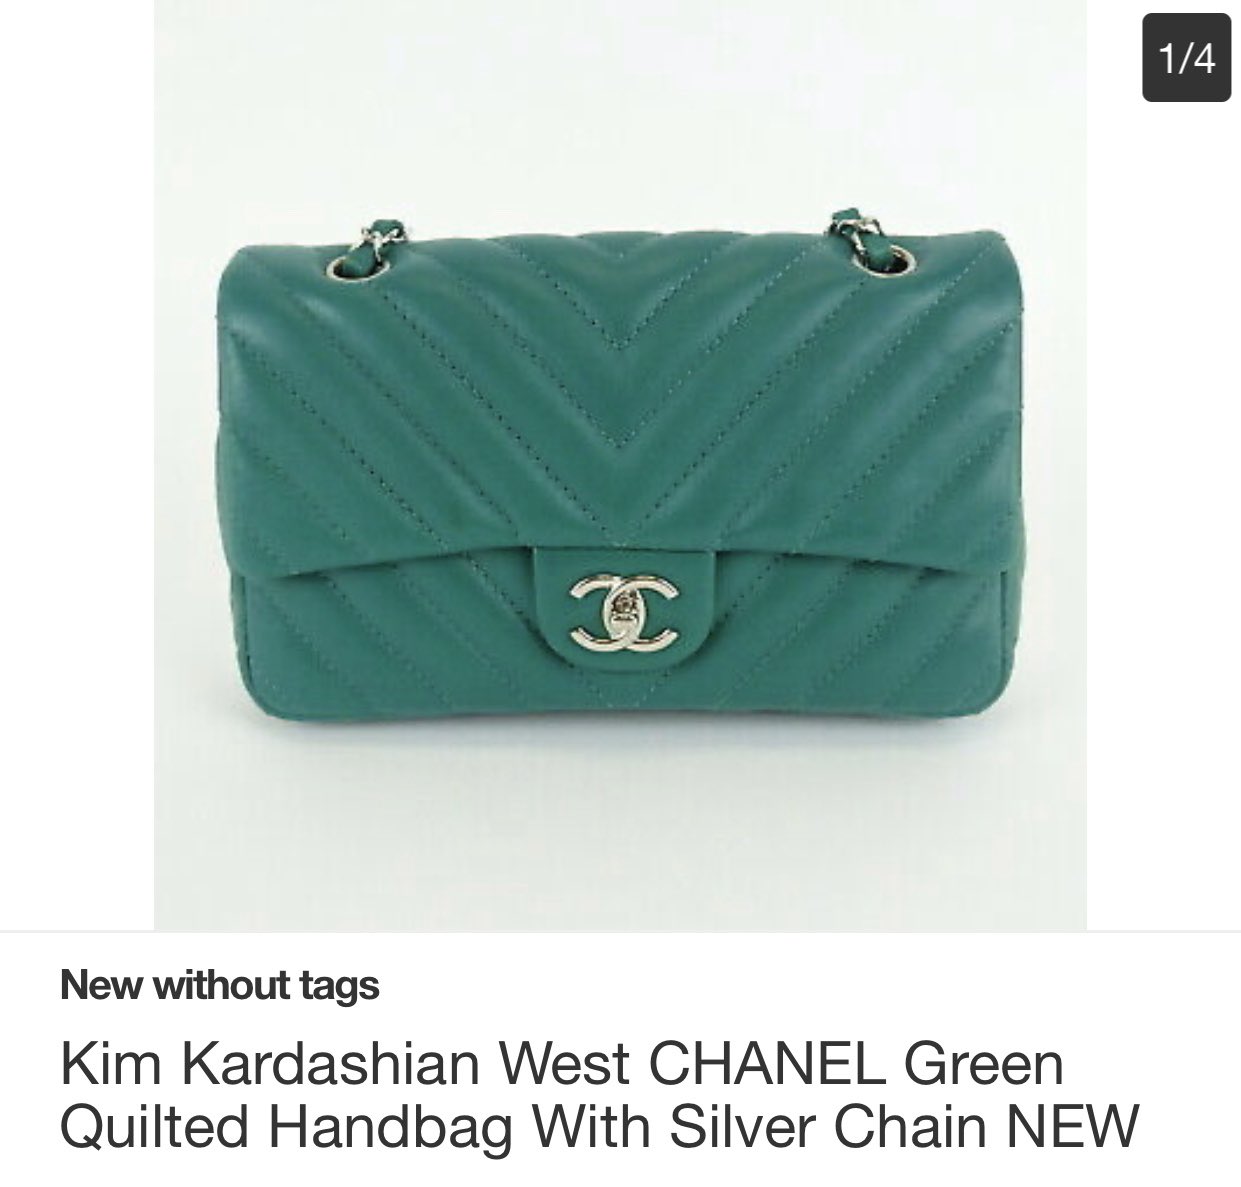 I hope either Kim or Kris show up with the Chanel Lego bag ( LIKE IM  BEGGING) : r/KUWTK